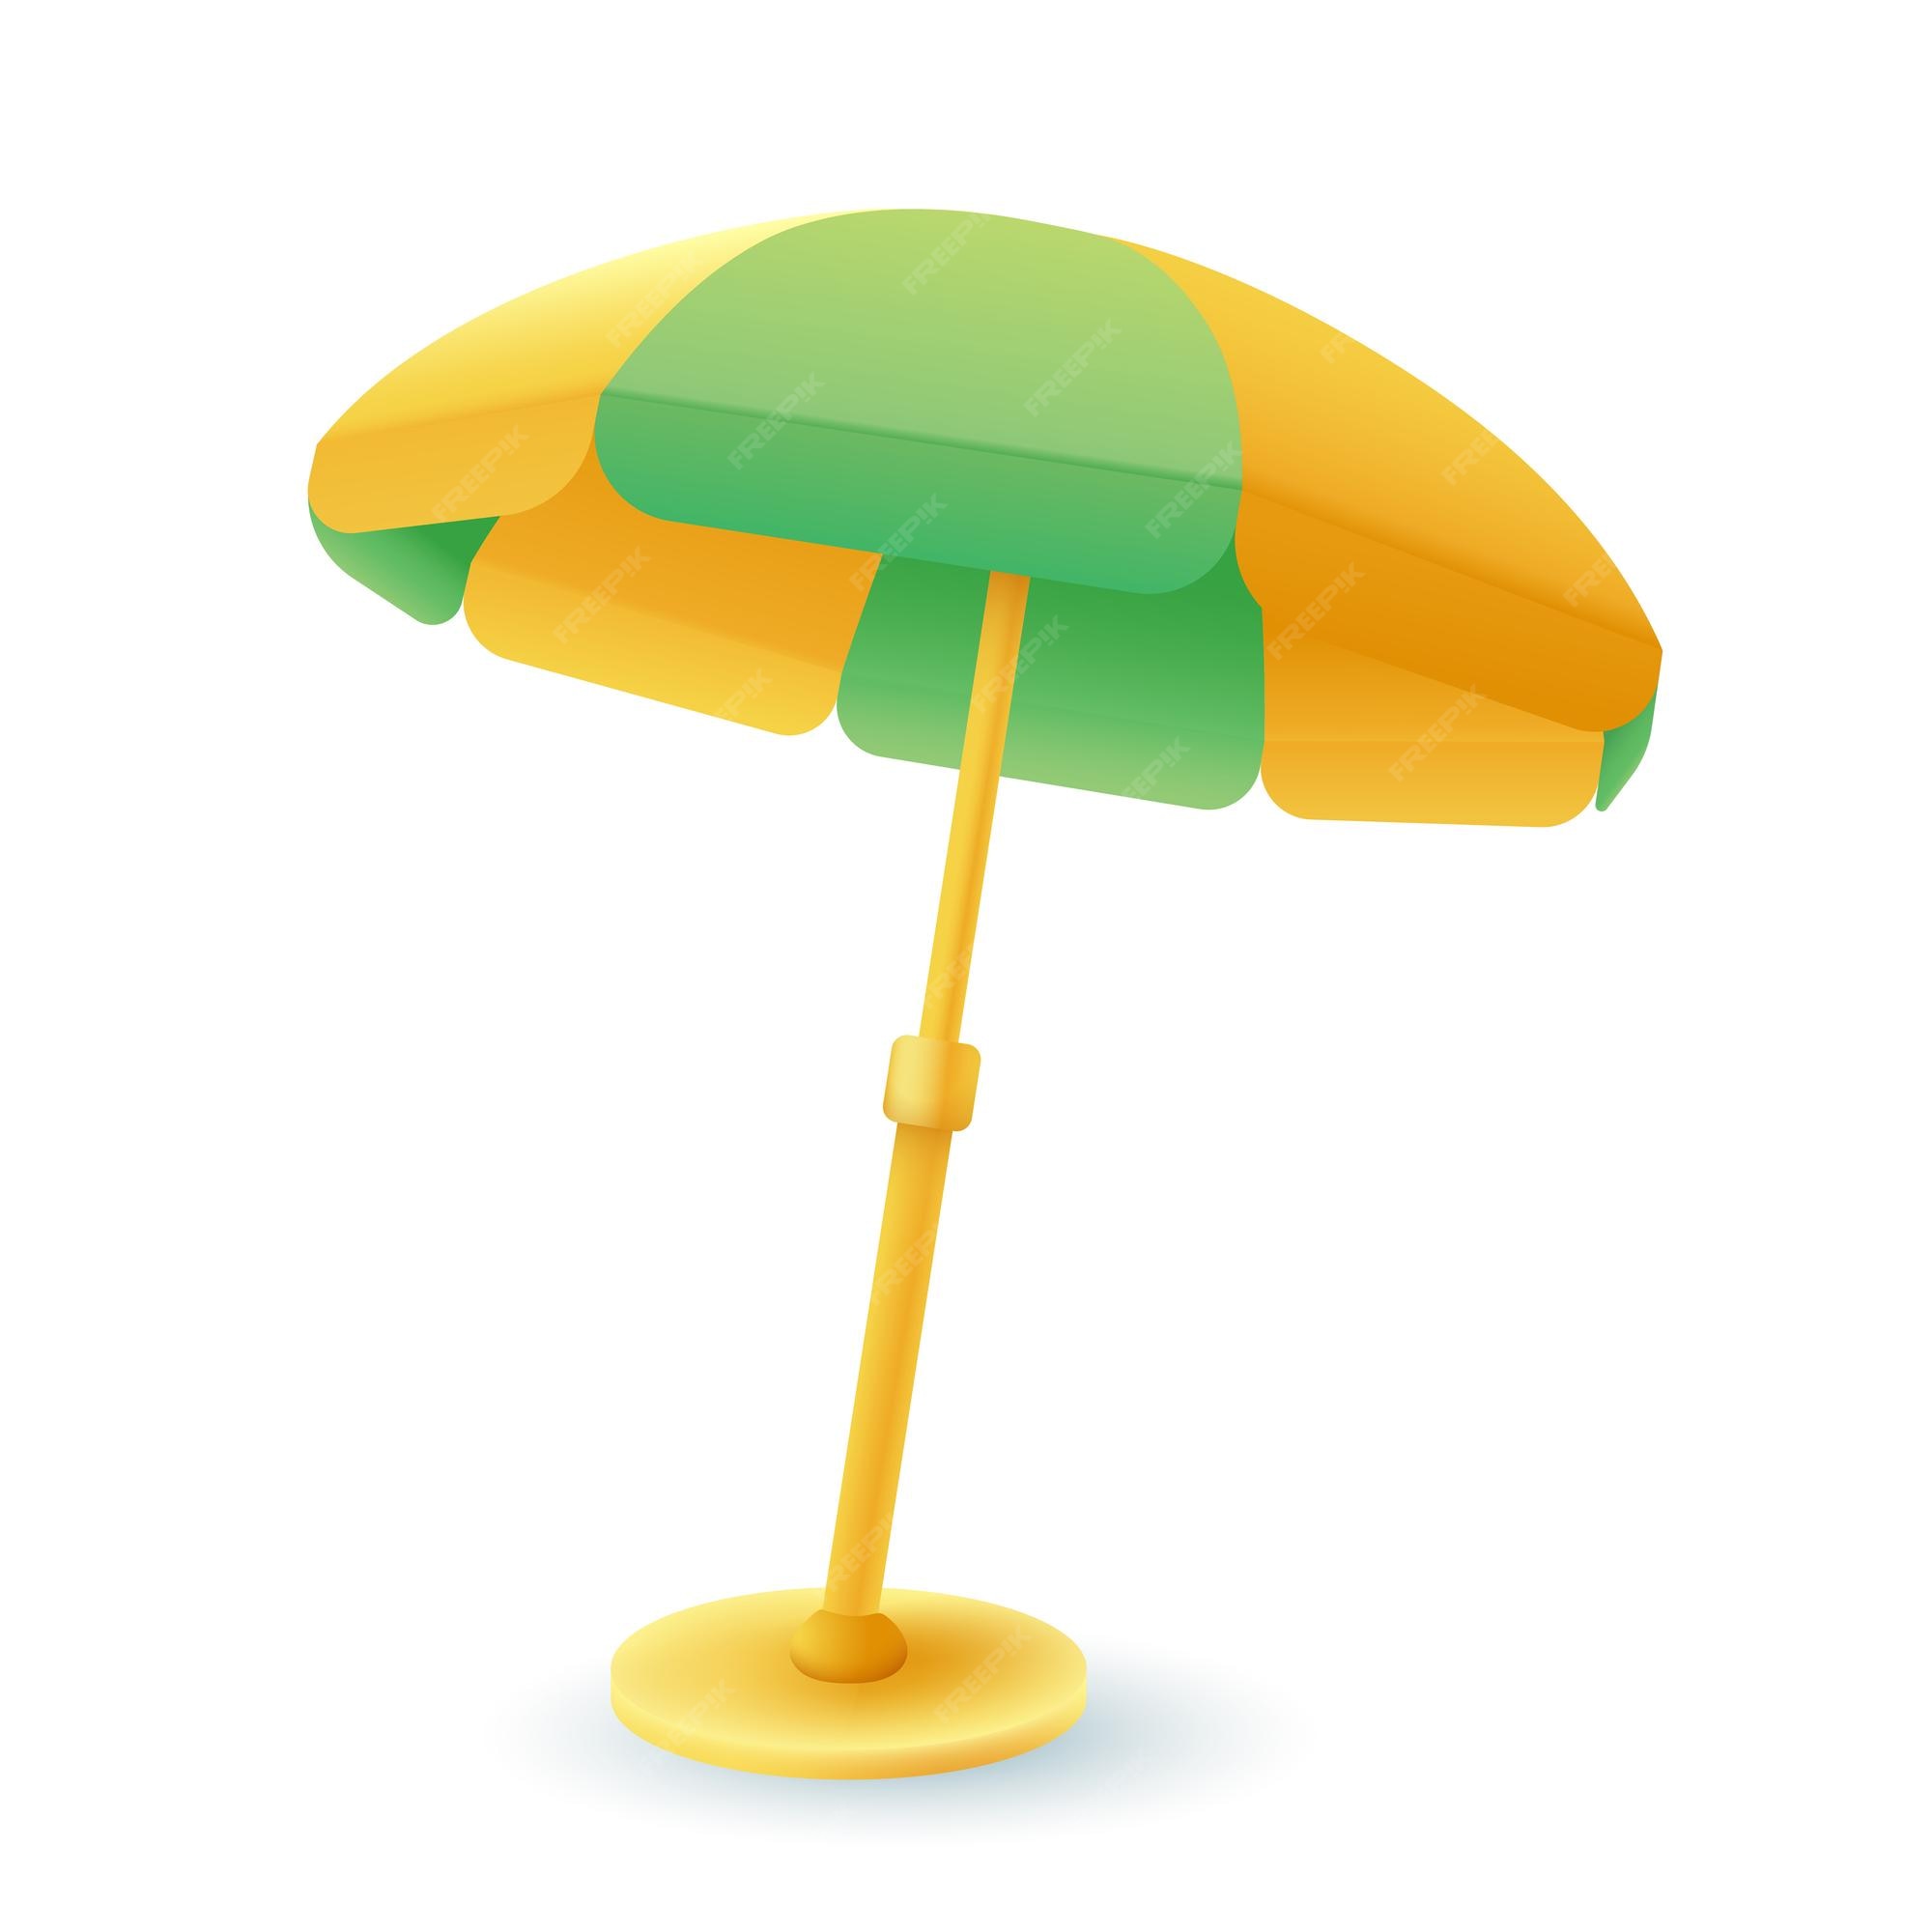 Premium Vector | 3d cartoon style beach umbrella icon on white background.  colorful striped sunshade flat vector illustration. heat protection on hot  days, summer, resort concept